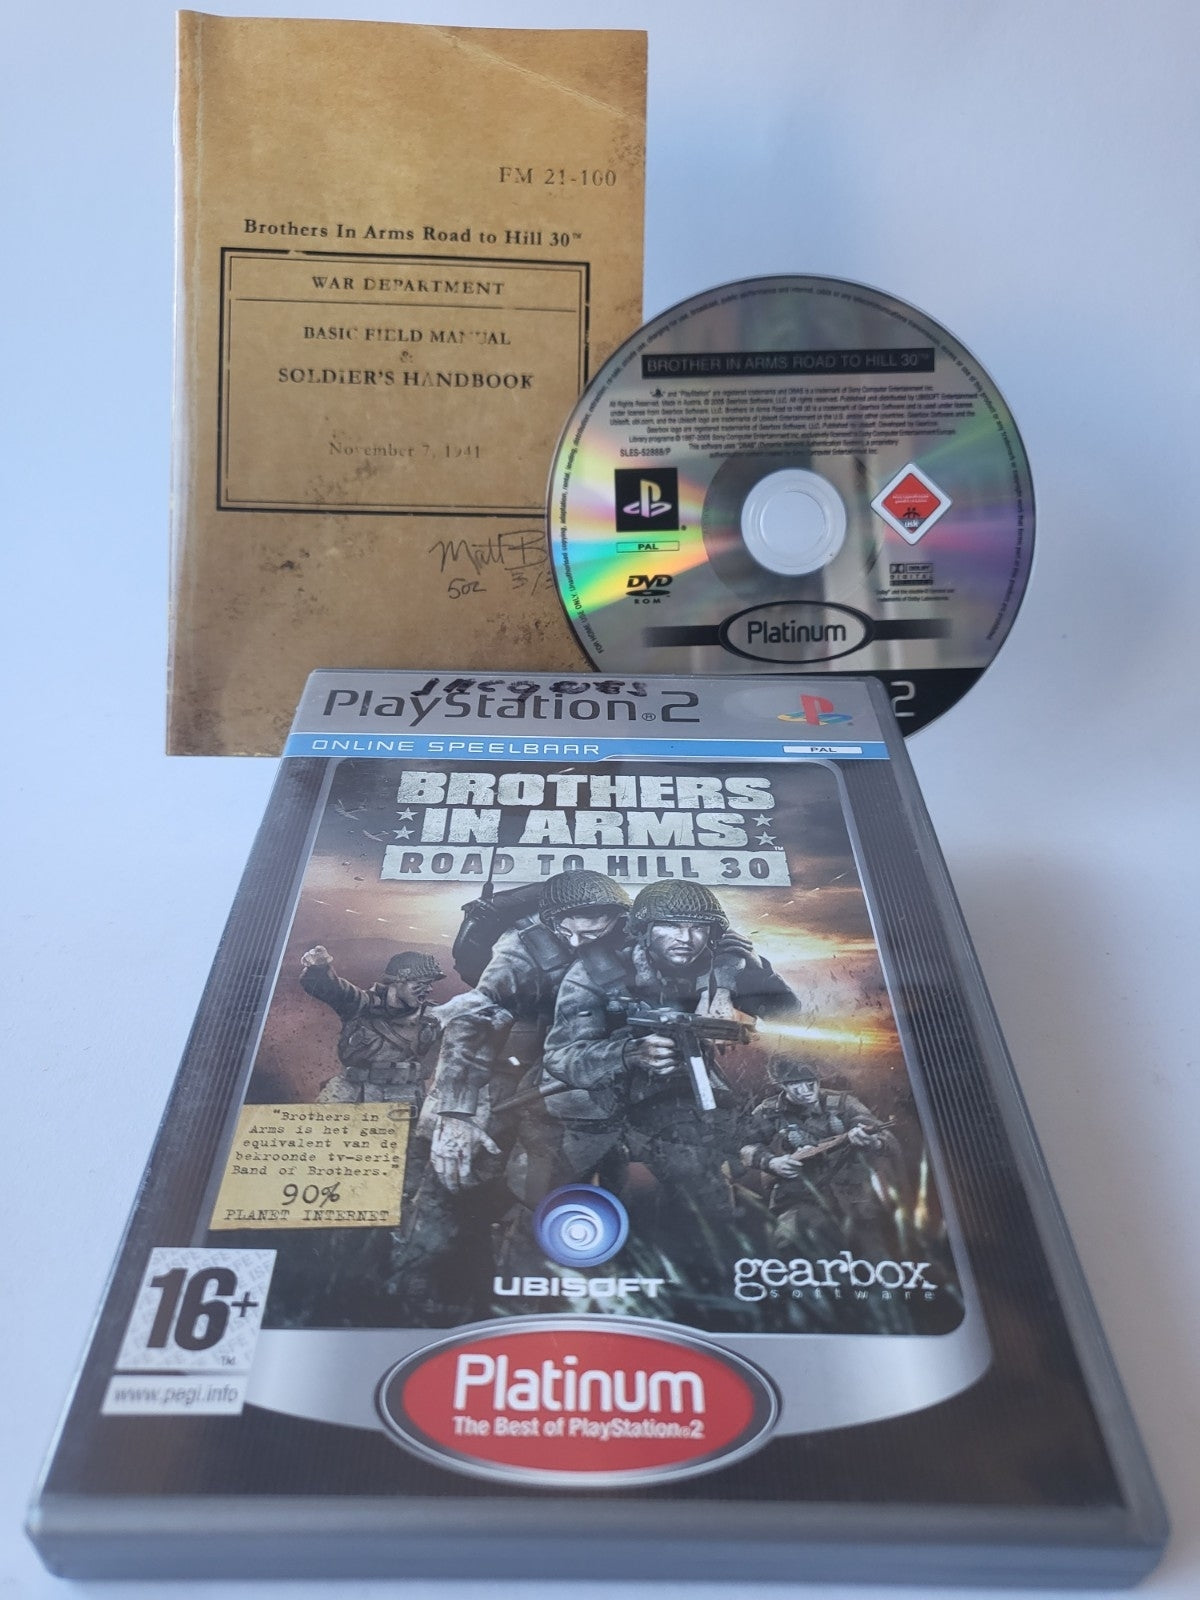 Brothers in Arms Road to Hill 30 Platinum Playstation 2